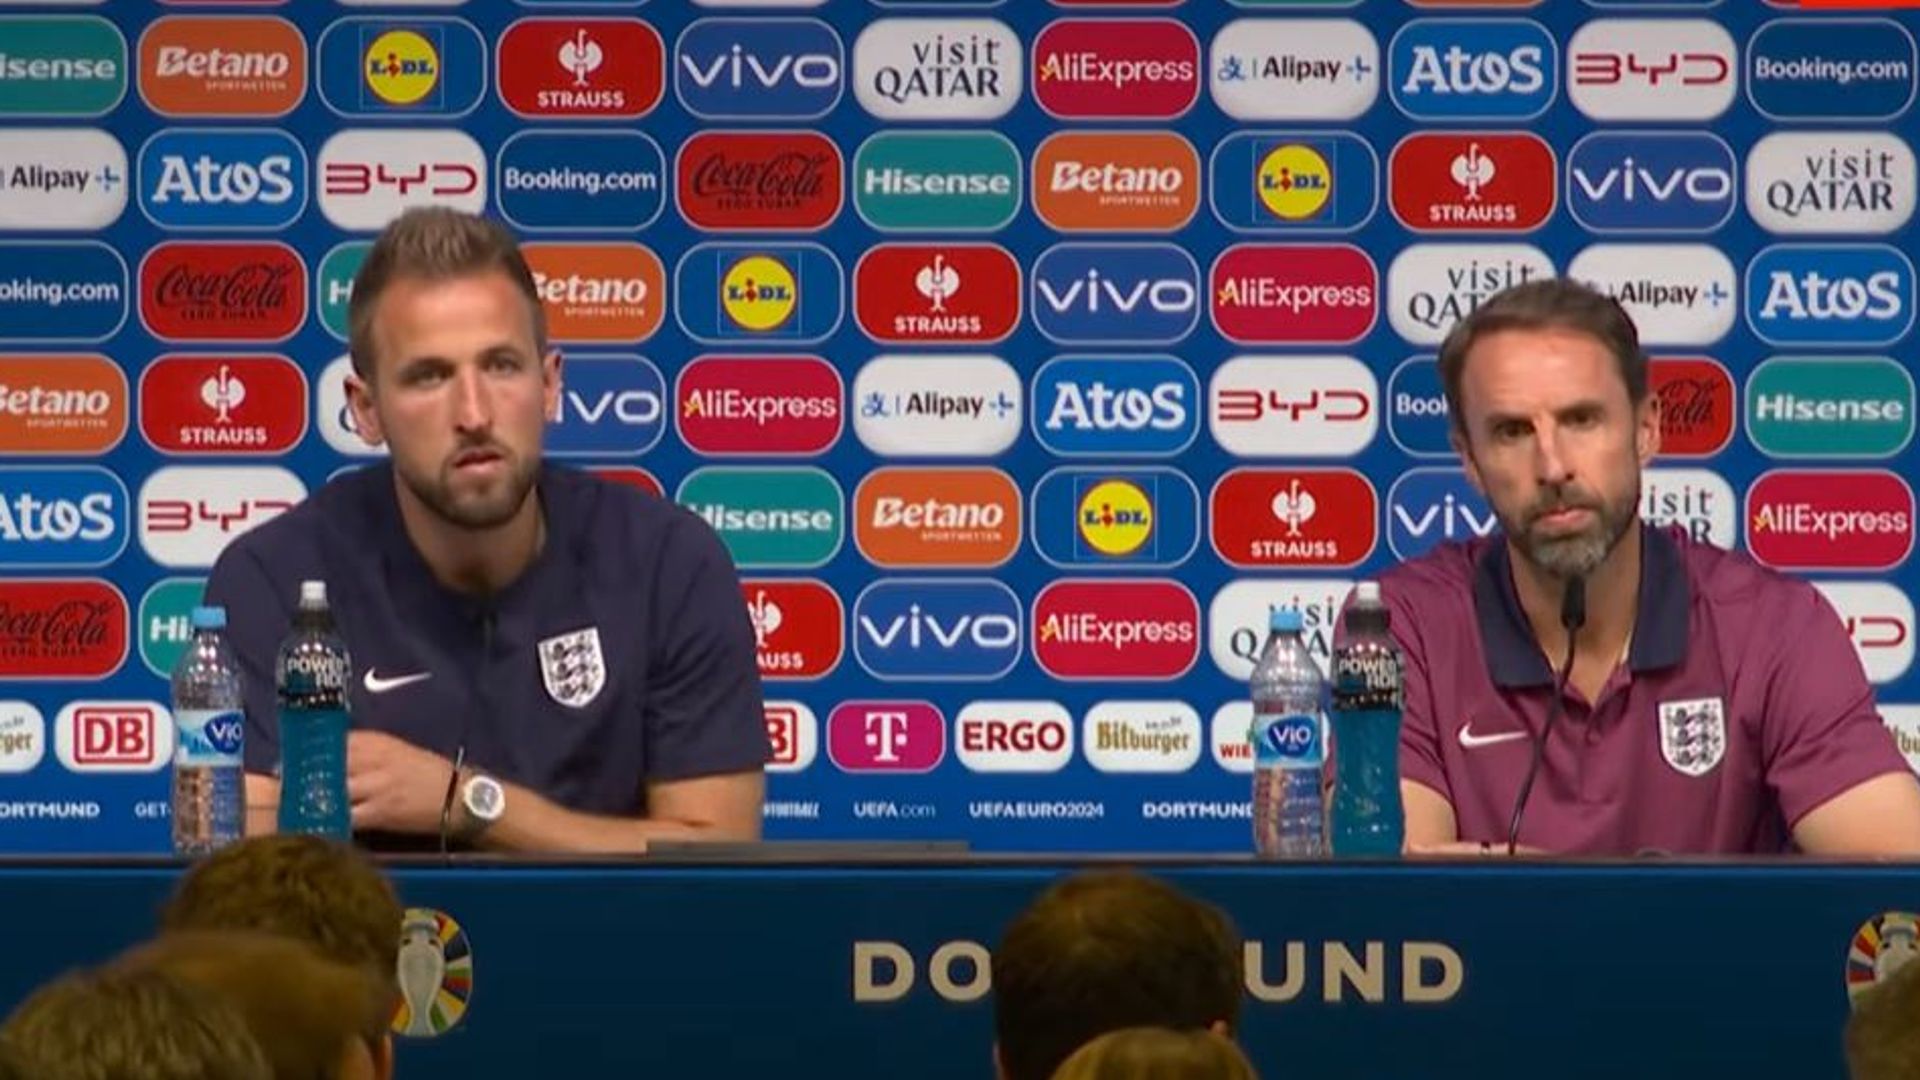 Southgate on referee and Luke Shaw injury concerns ahead of Netherlands clash